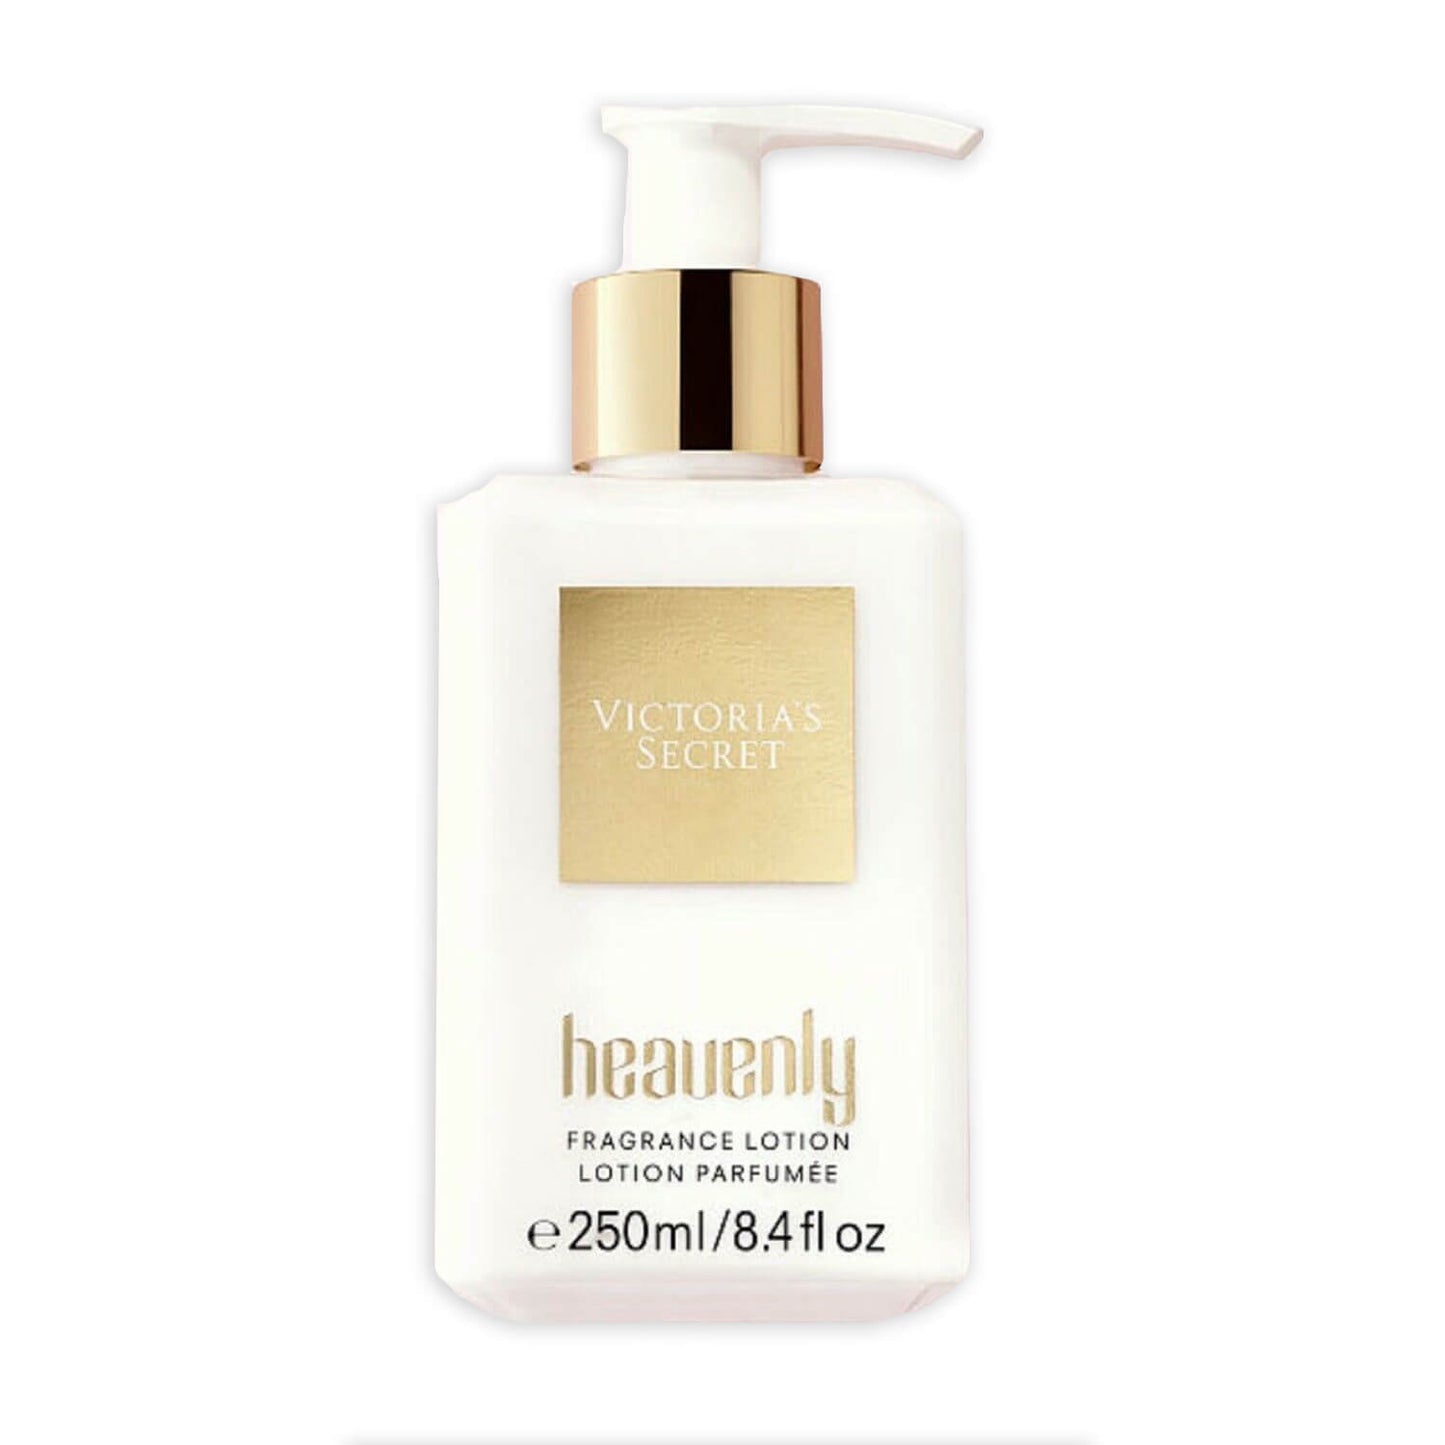 Victoria's Secret Fragrance Lotion - Heavenly available at Heygirl.pk for delivery in Karachi, Lahore, Islamabad across Pakistan. 